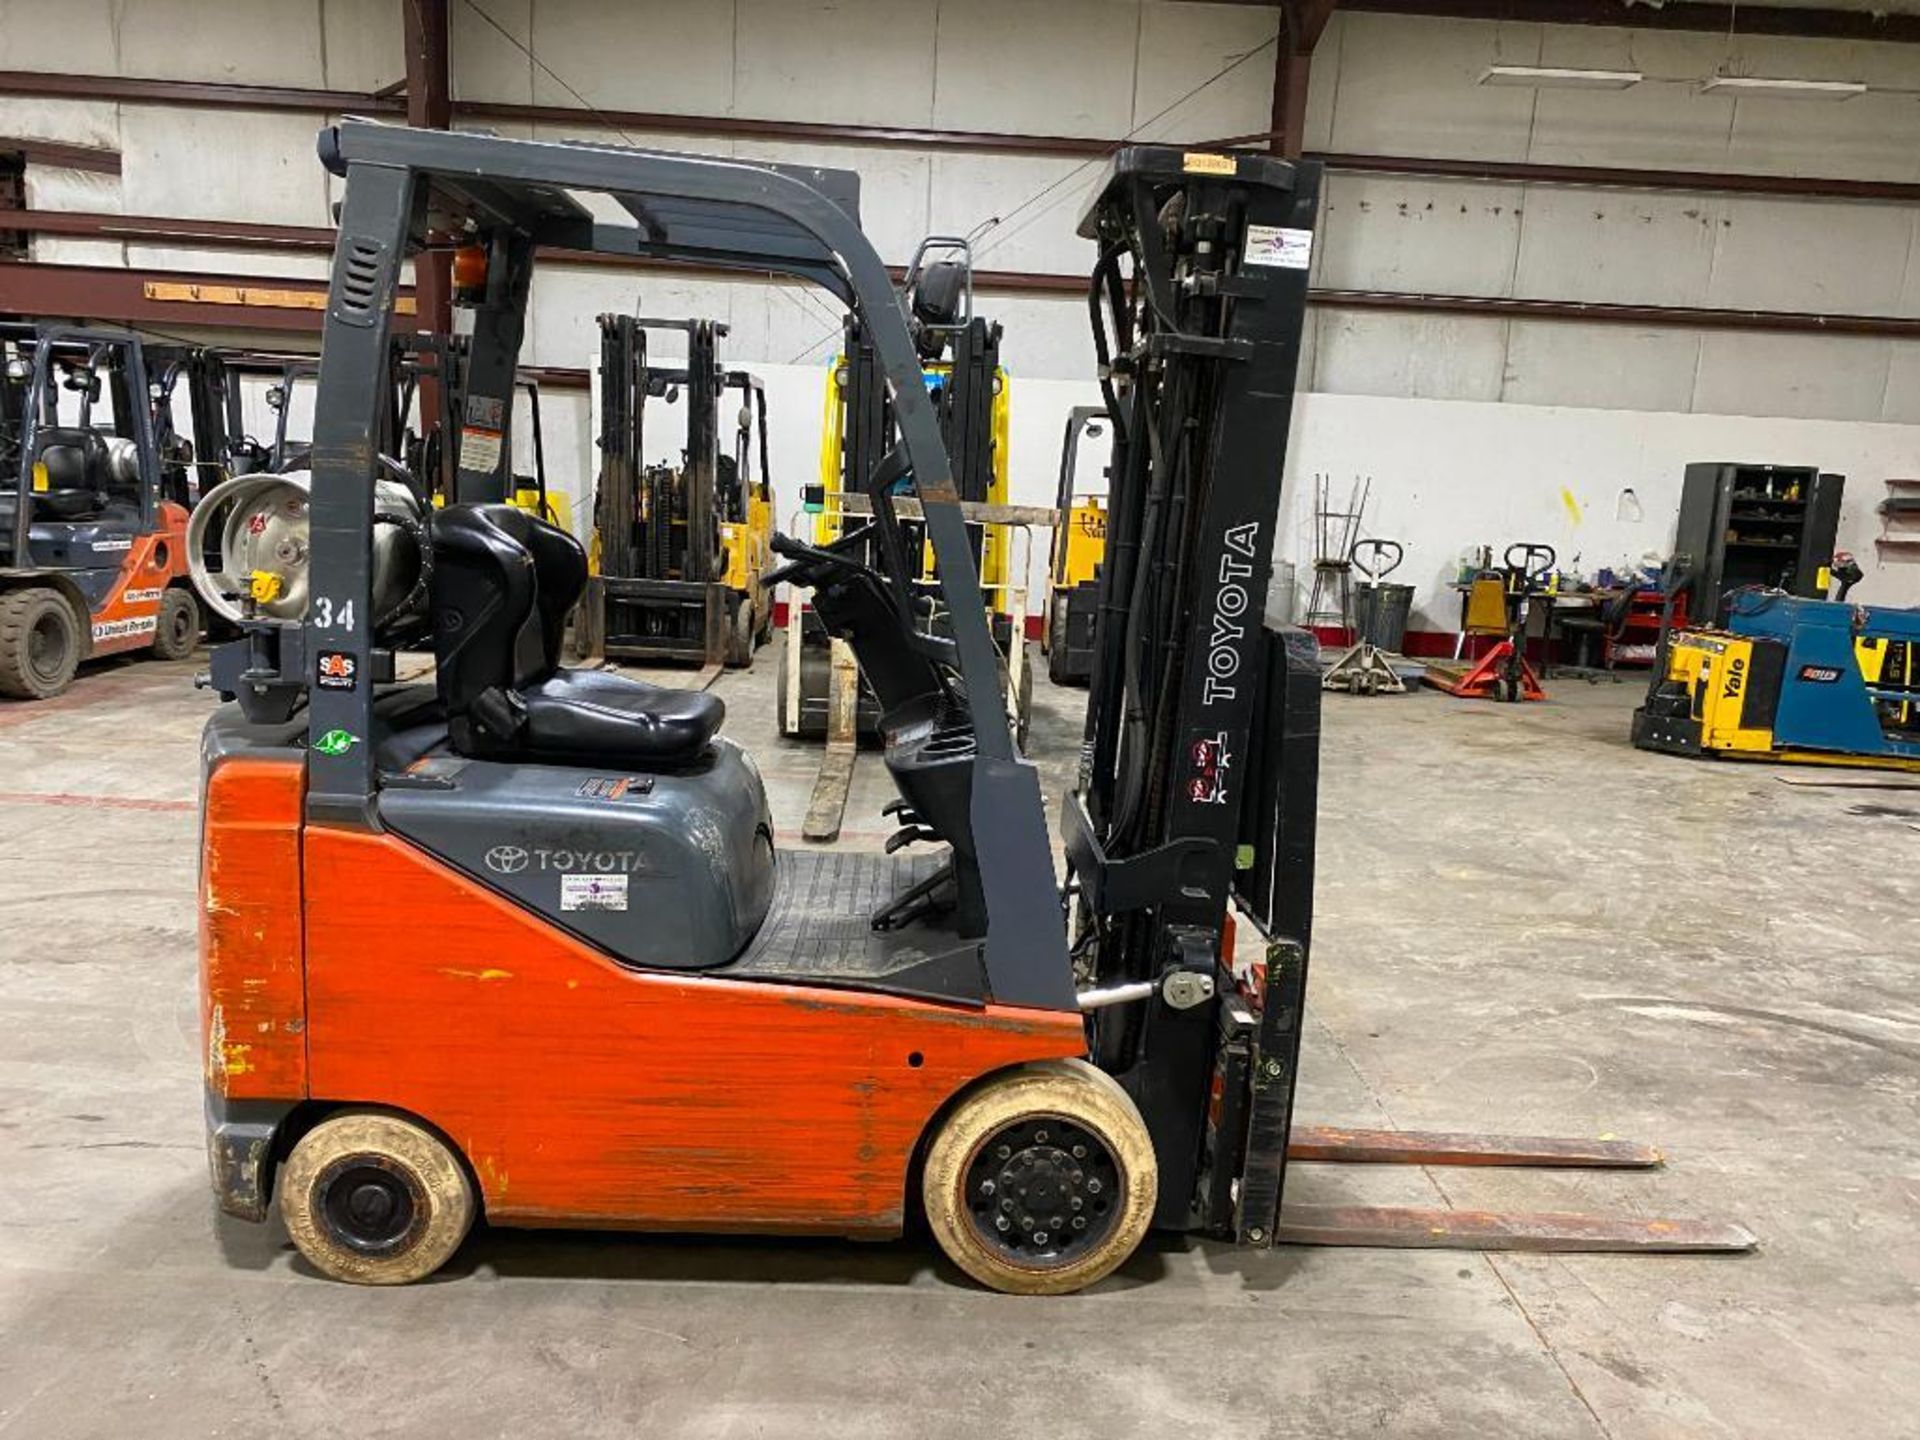 2016 Toyota 3,000-LB. Capacity Forklift, Model 8FGCU15, S/N 35454, LPG, Non-Marking Cushion Tires, 3 - Image 3 of 5